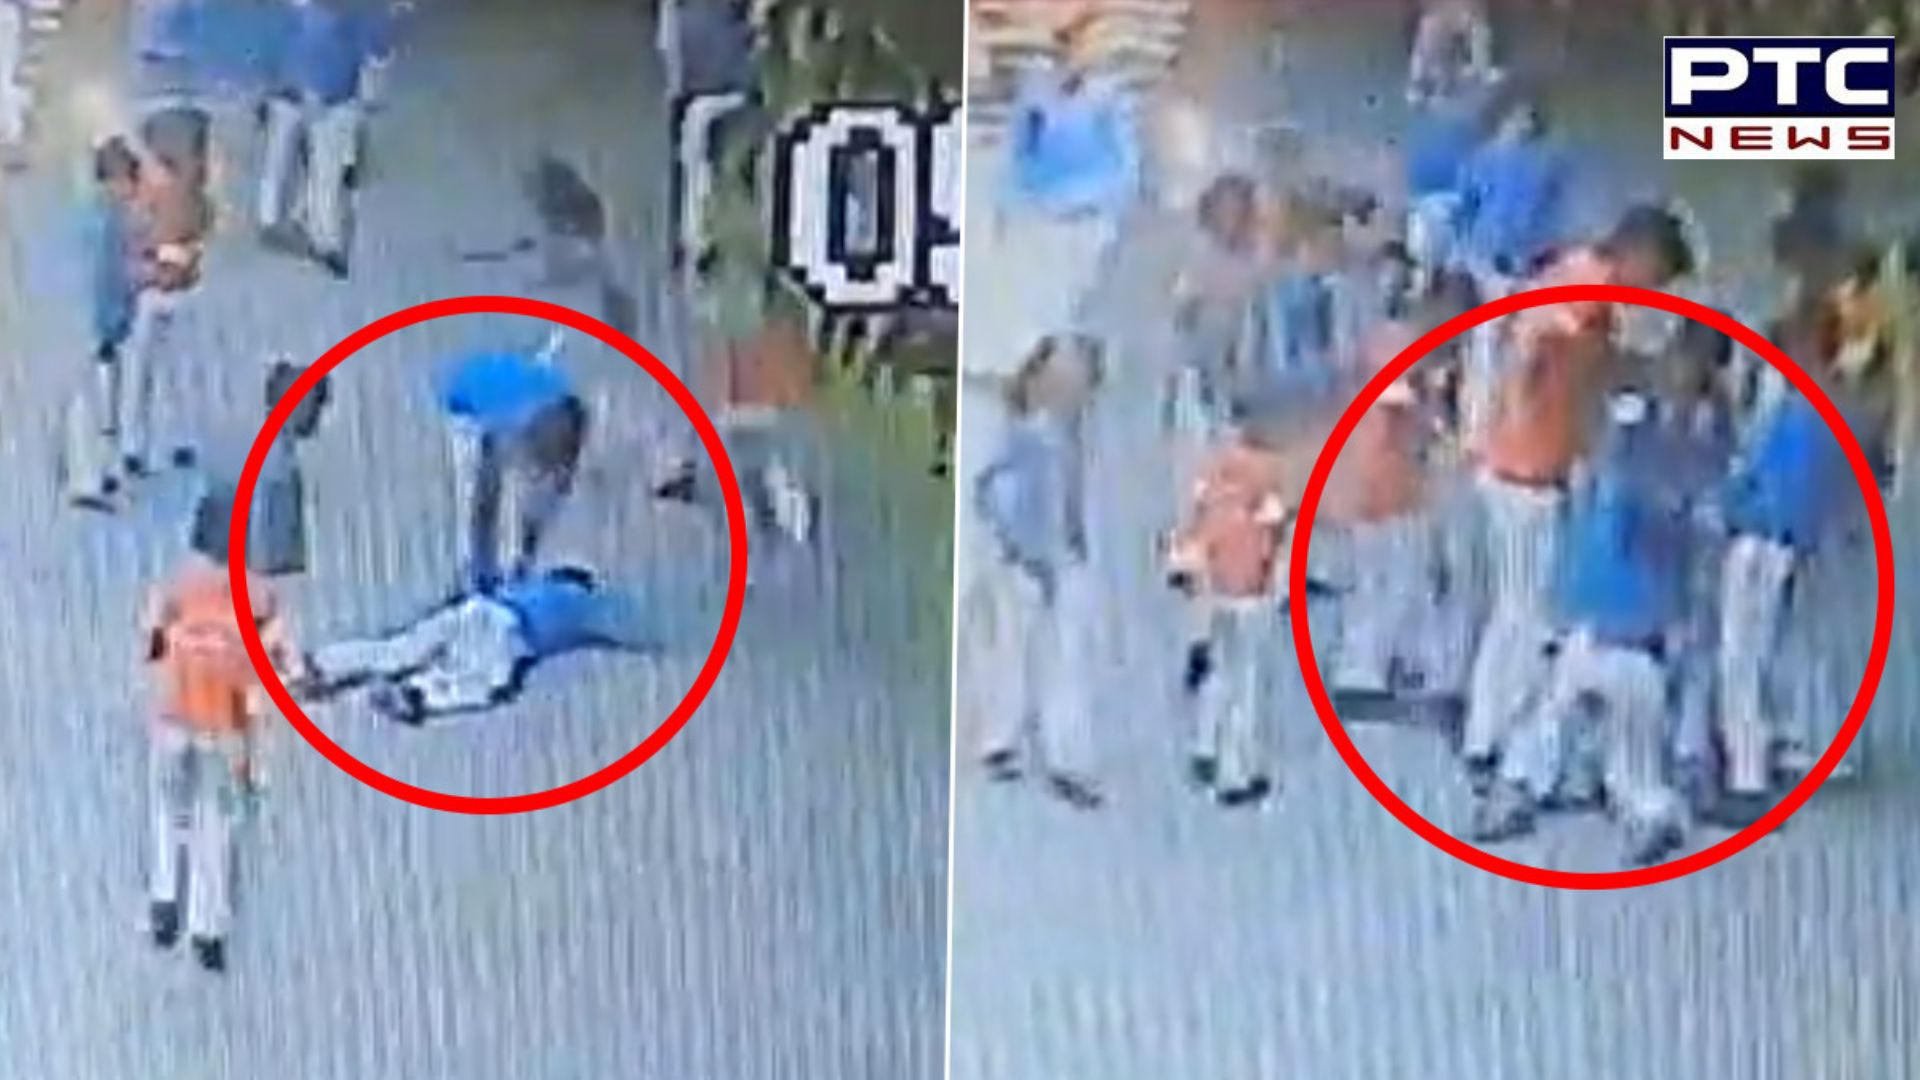 8-year-old boy collapses, dies while playing at UP school; video surfaces